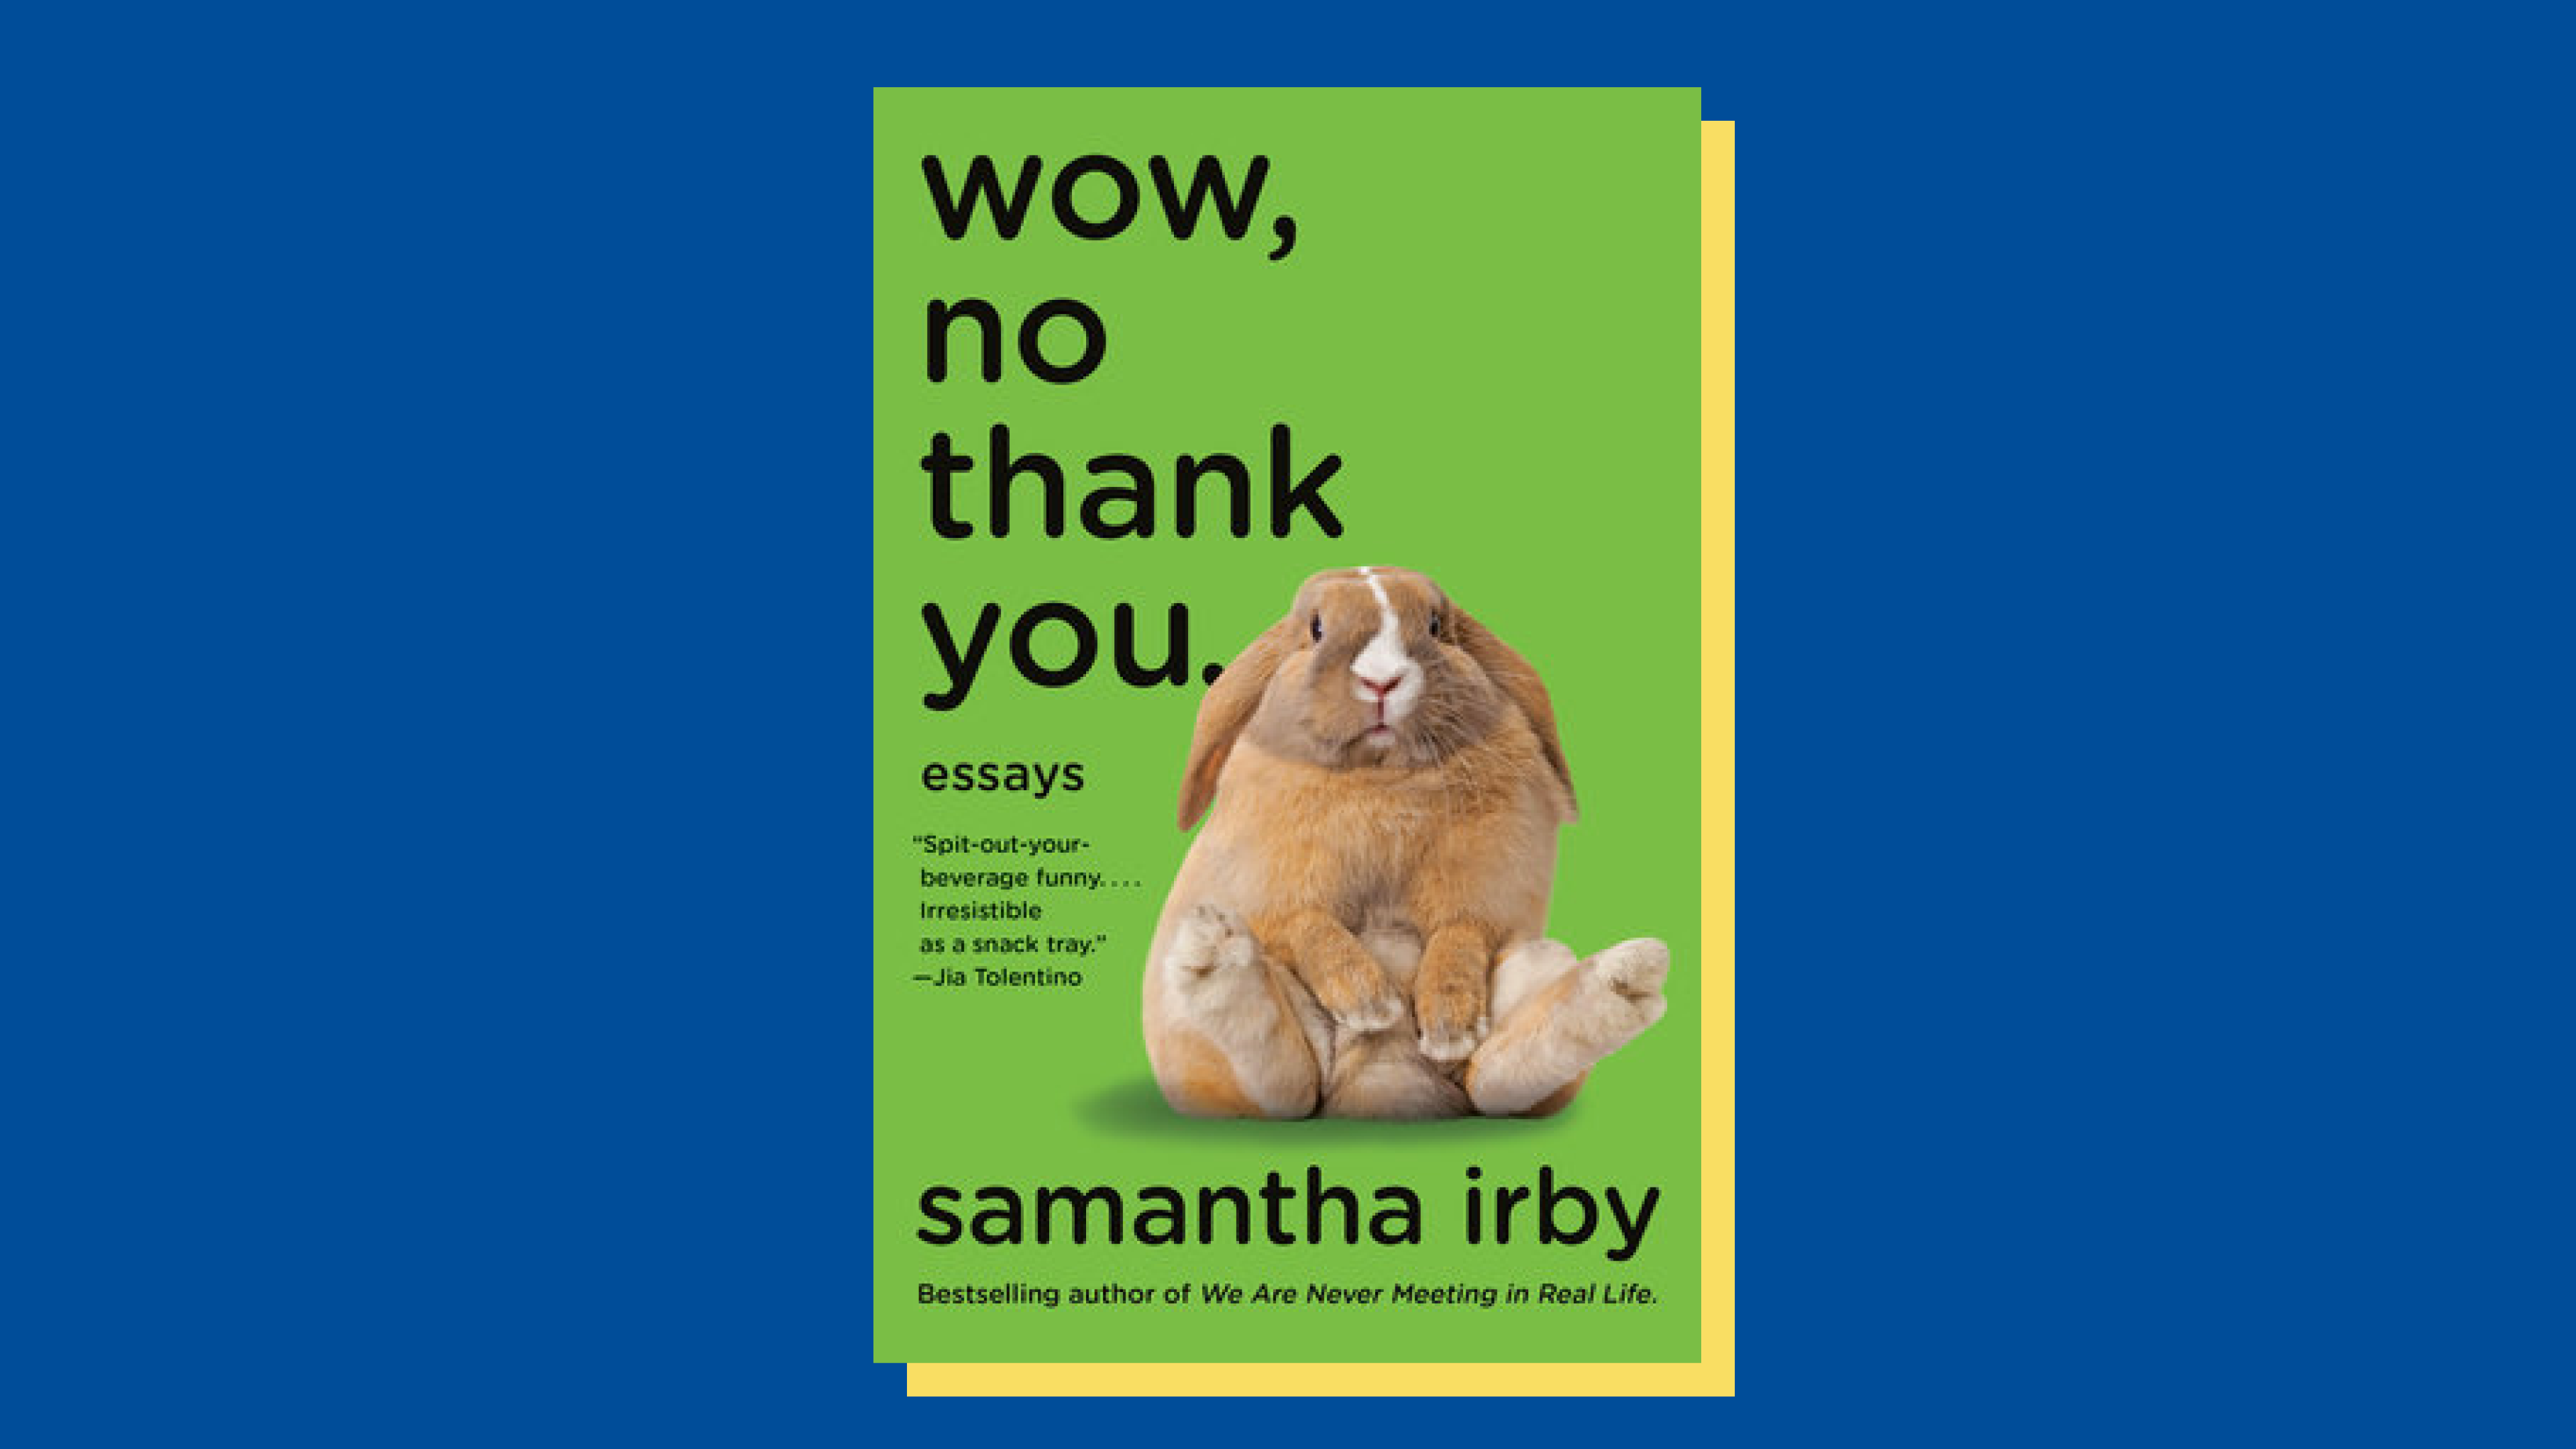 “Wow, No Thank You” by Samantha Irby